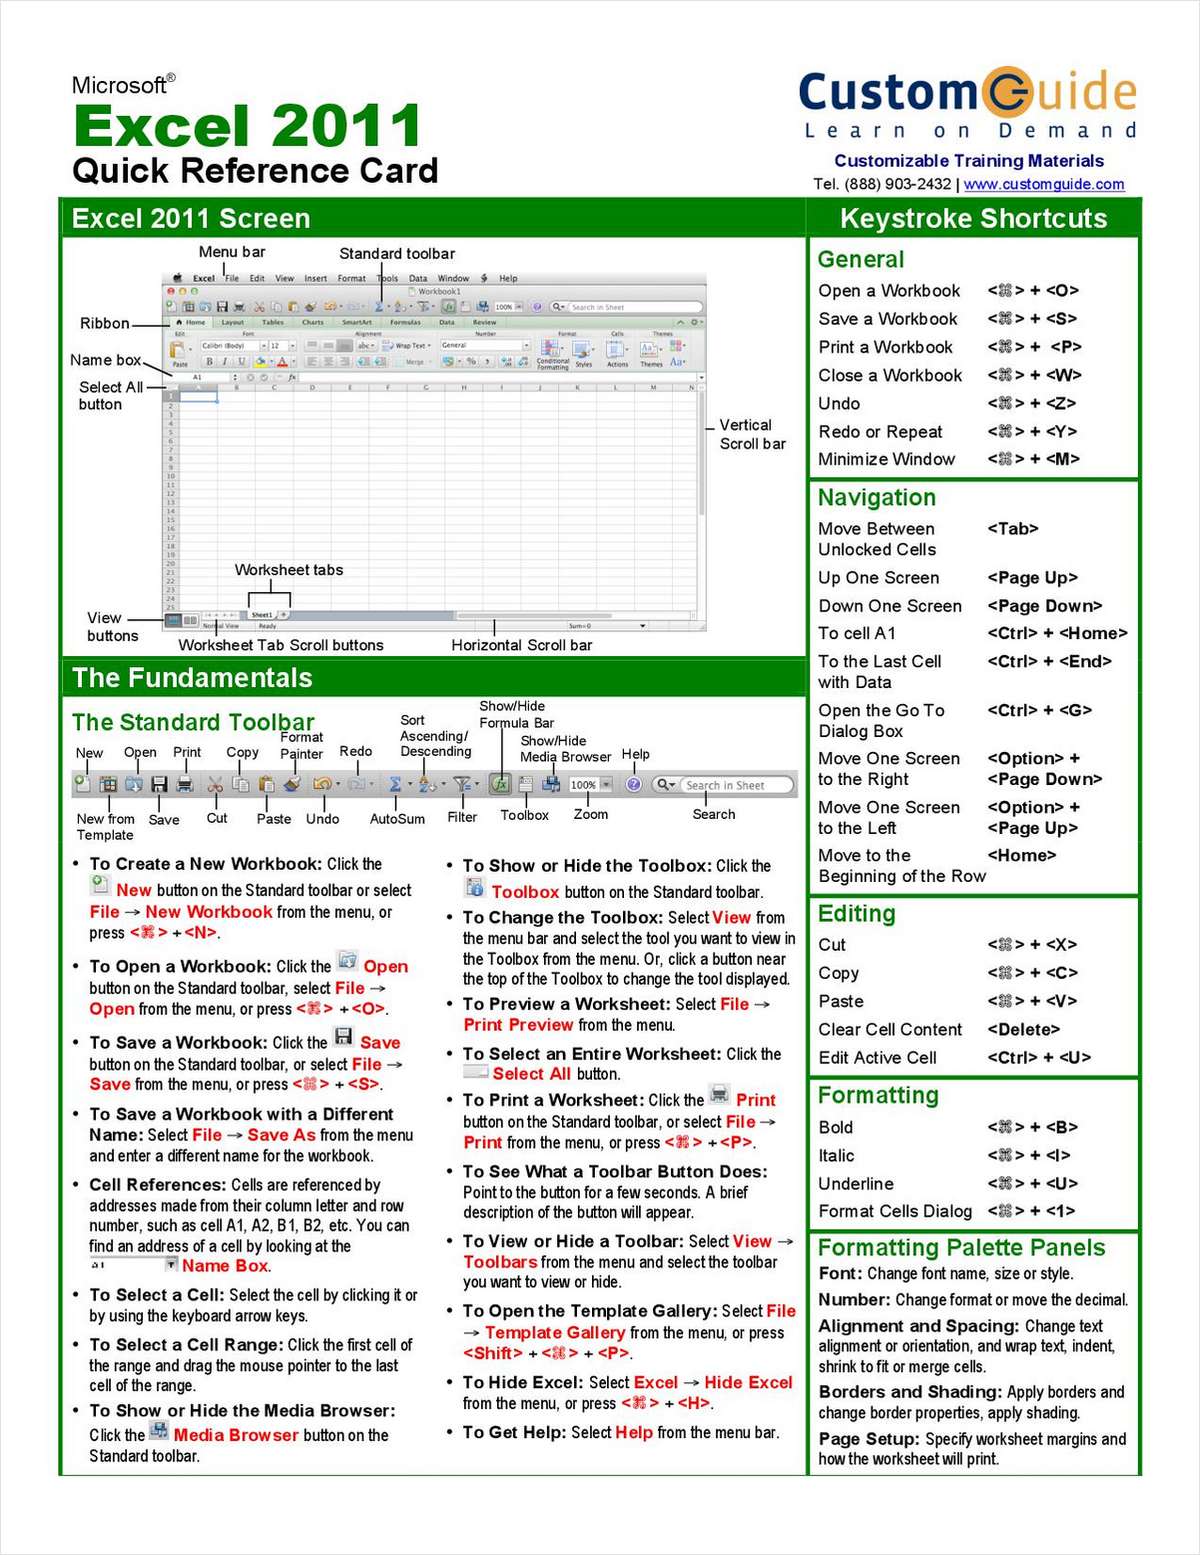 Microsoft Excel 2011 Free Quick Reference Card Free Reference Card